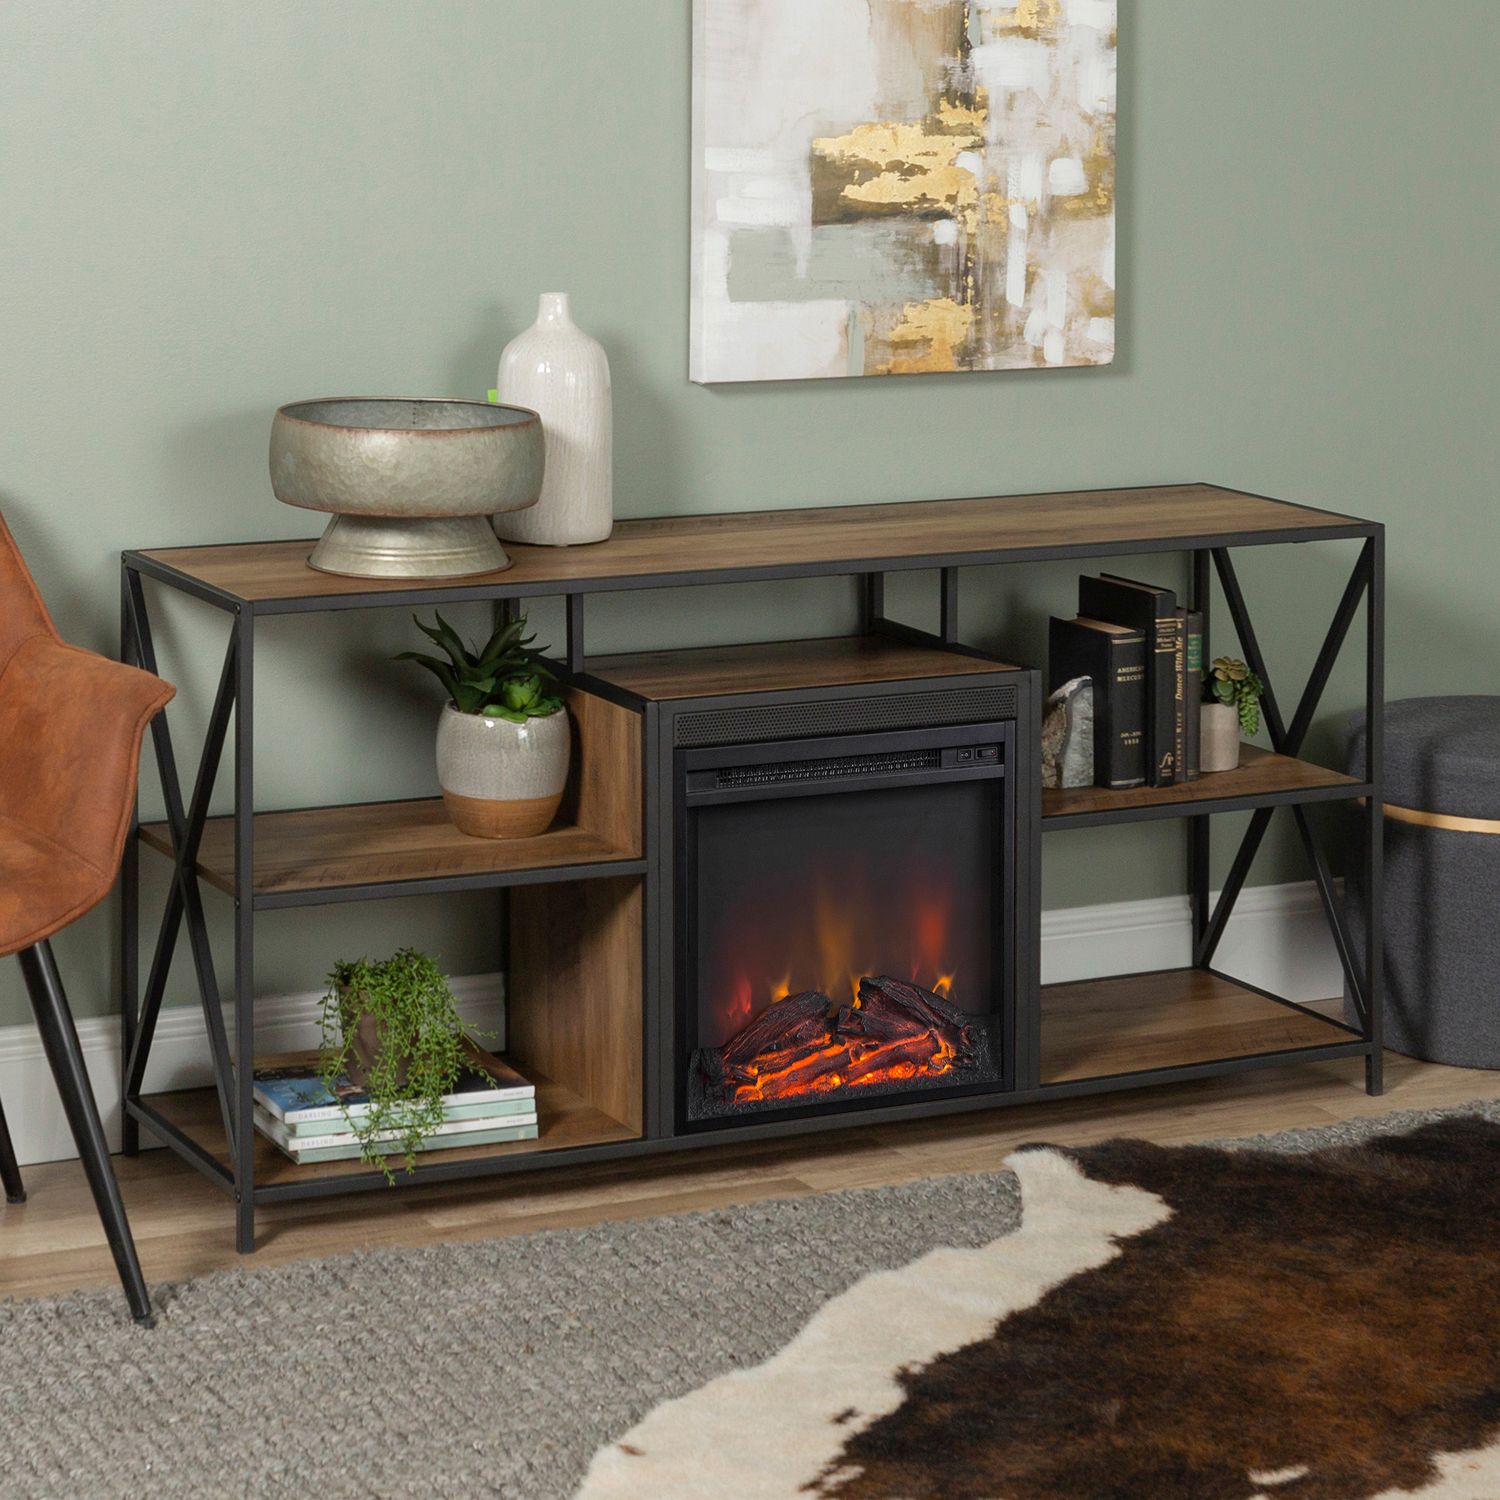 Rustic Oak Tv Stand With Fireplace – Pier1 Regarding Urban Rustic Tv Stands (View 4 of 15)